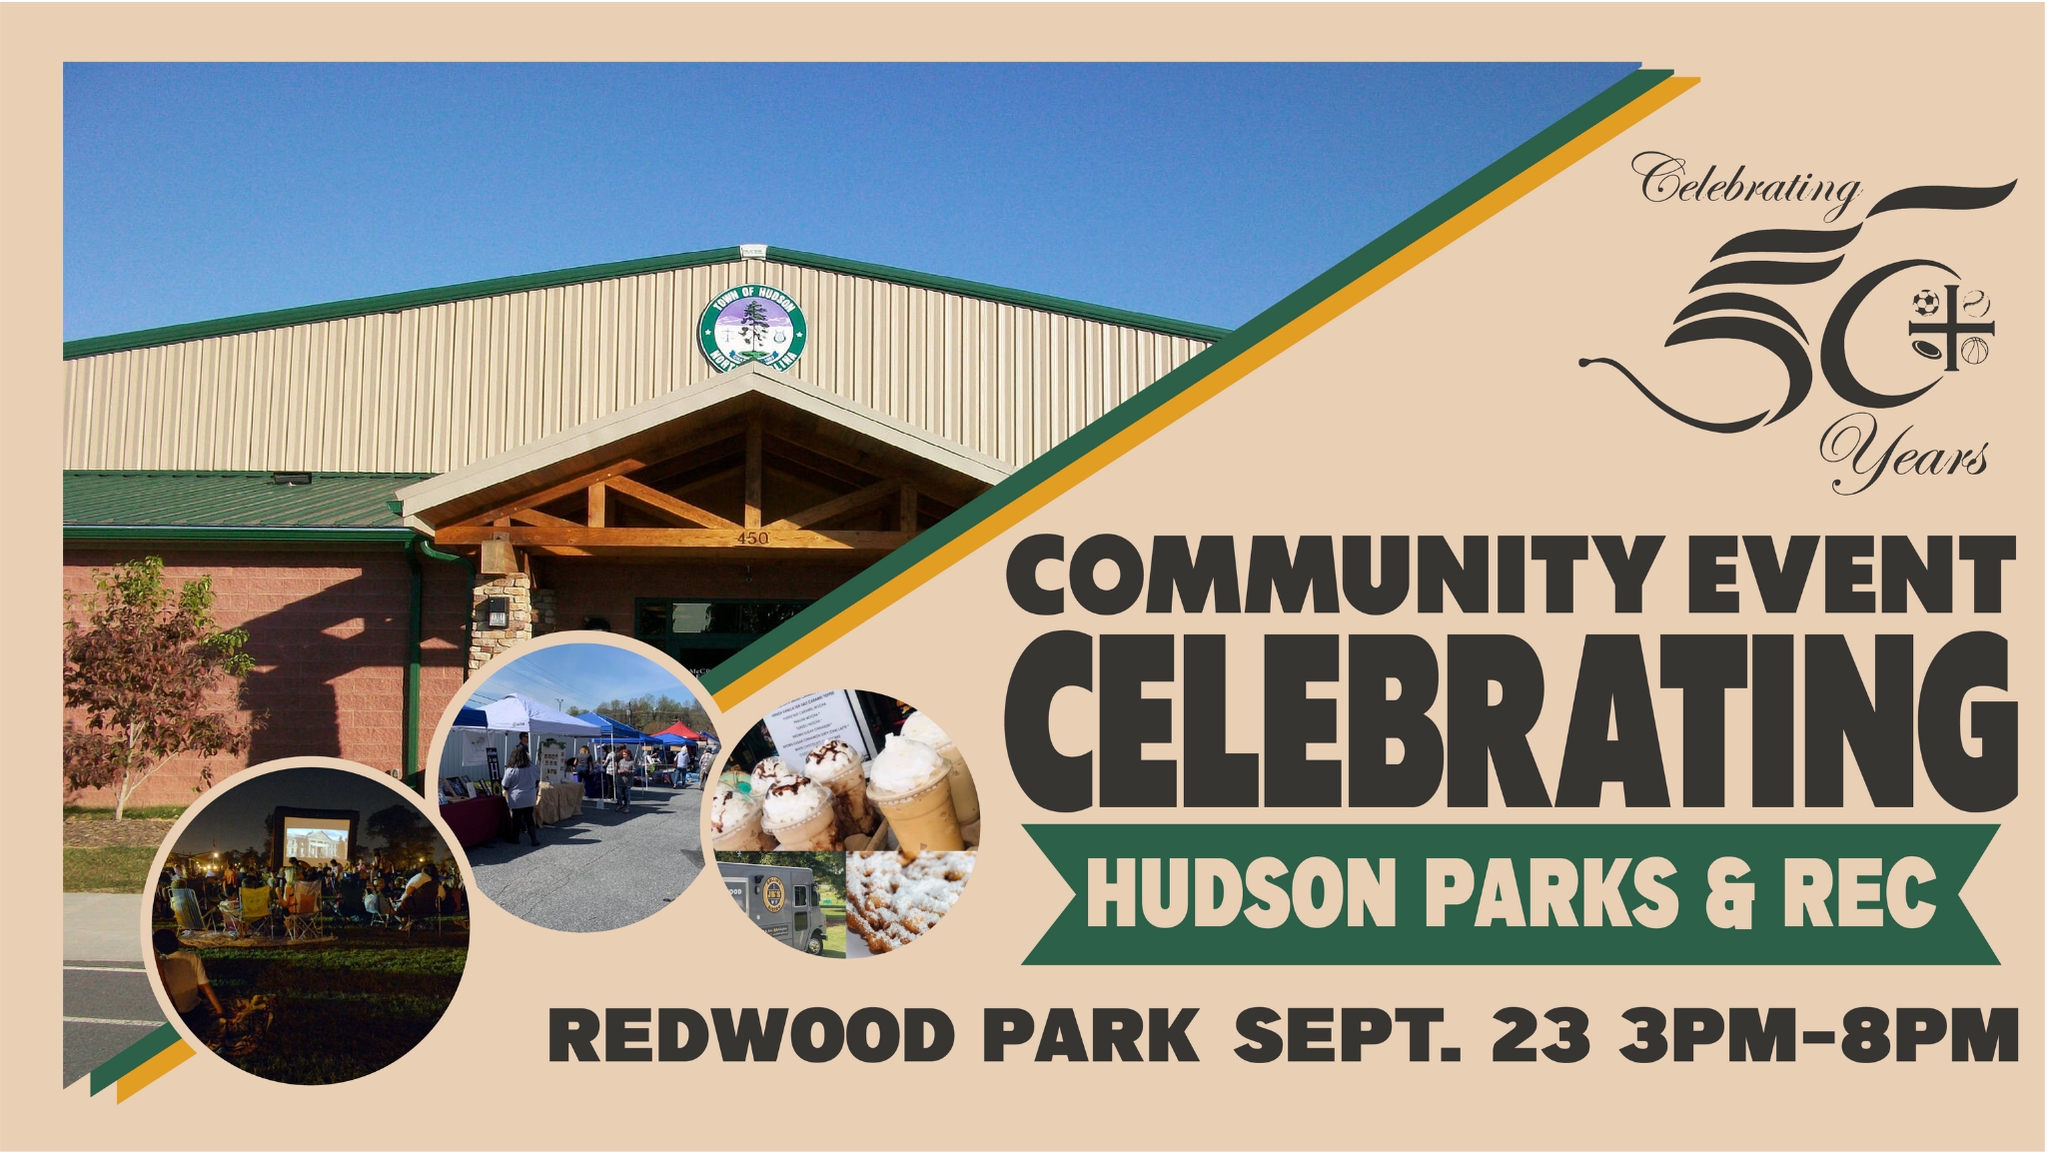 Celebrating 50 Years of Hudson Parks & Recreation cover image